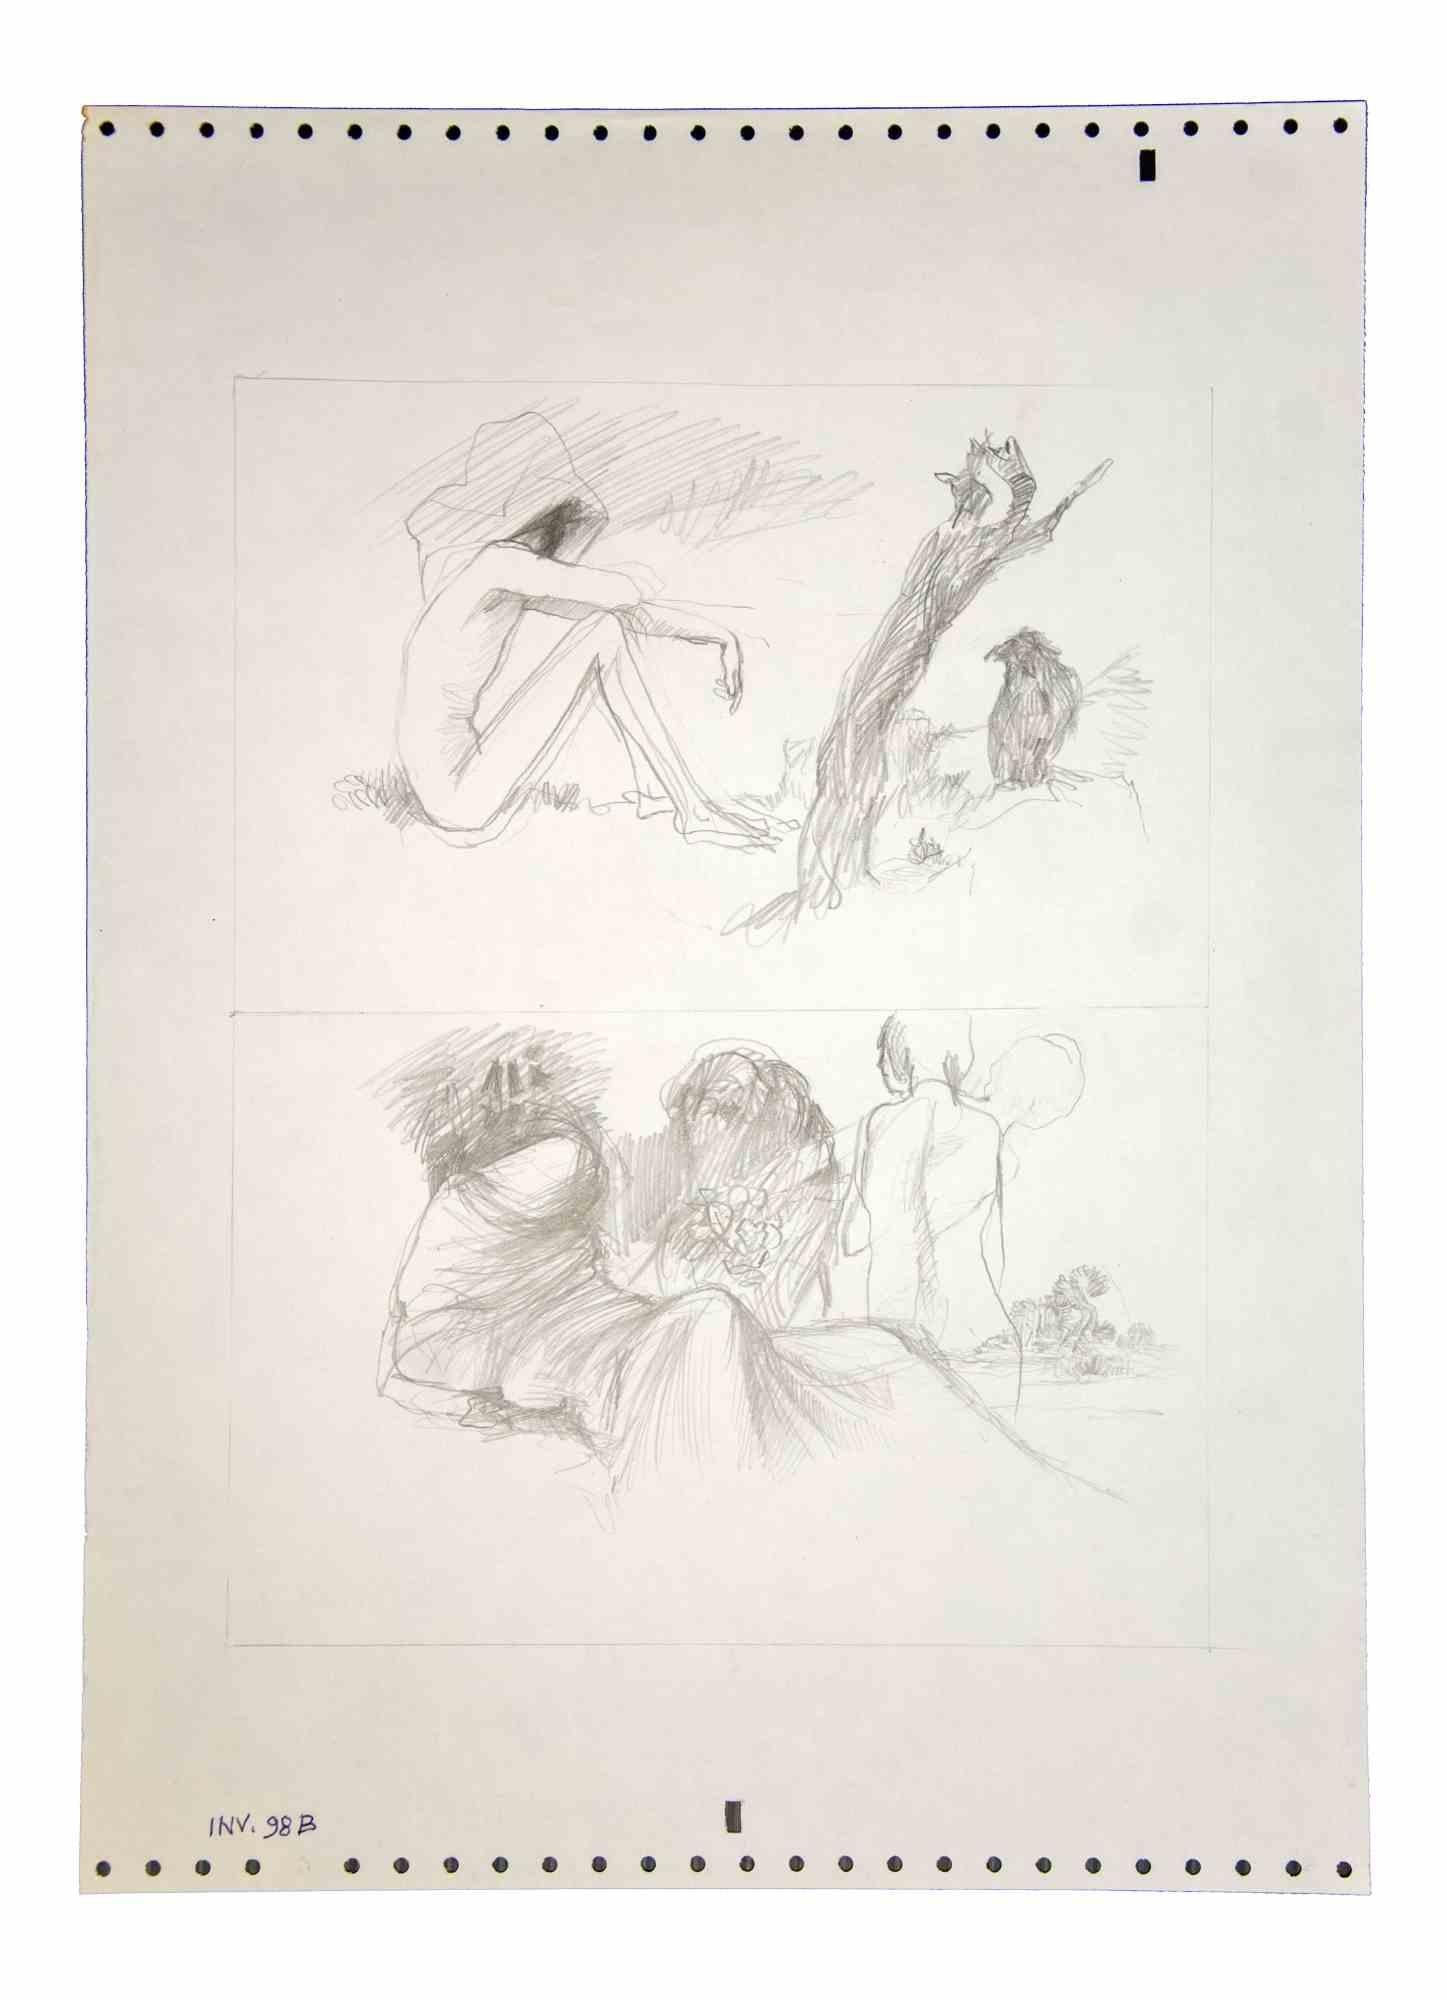 The History of the Sybil is an original artwork realized in the 1970s by the Italian Contemporary artist Leo Guida  (1992 - 2017).

Original pecil drawing on paper.

Good conditions.

Leo Guida  (1992 - 2017). Sensitive to current issues, artistic